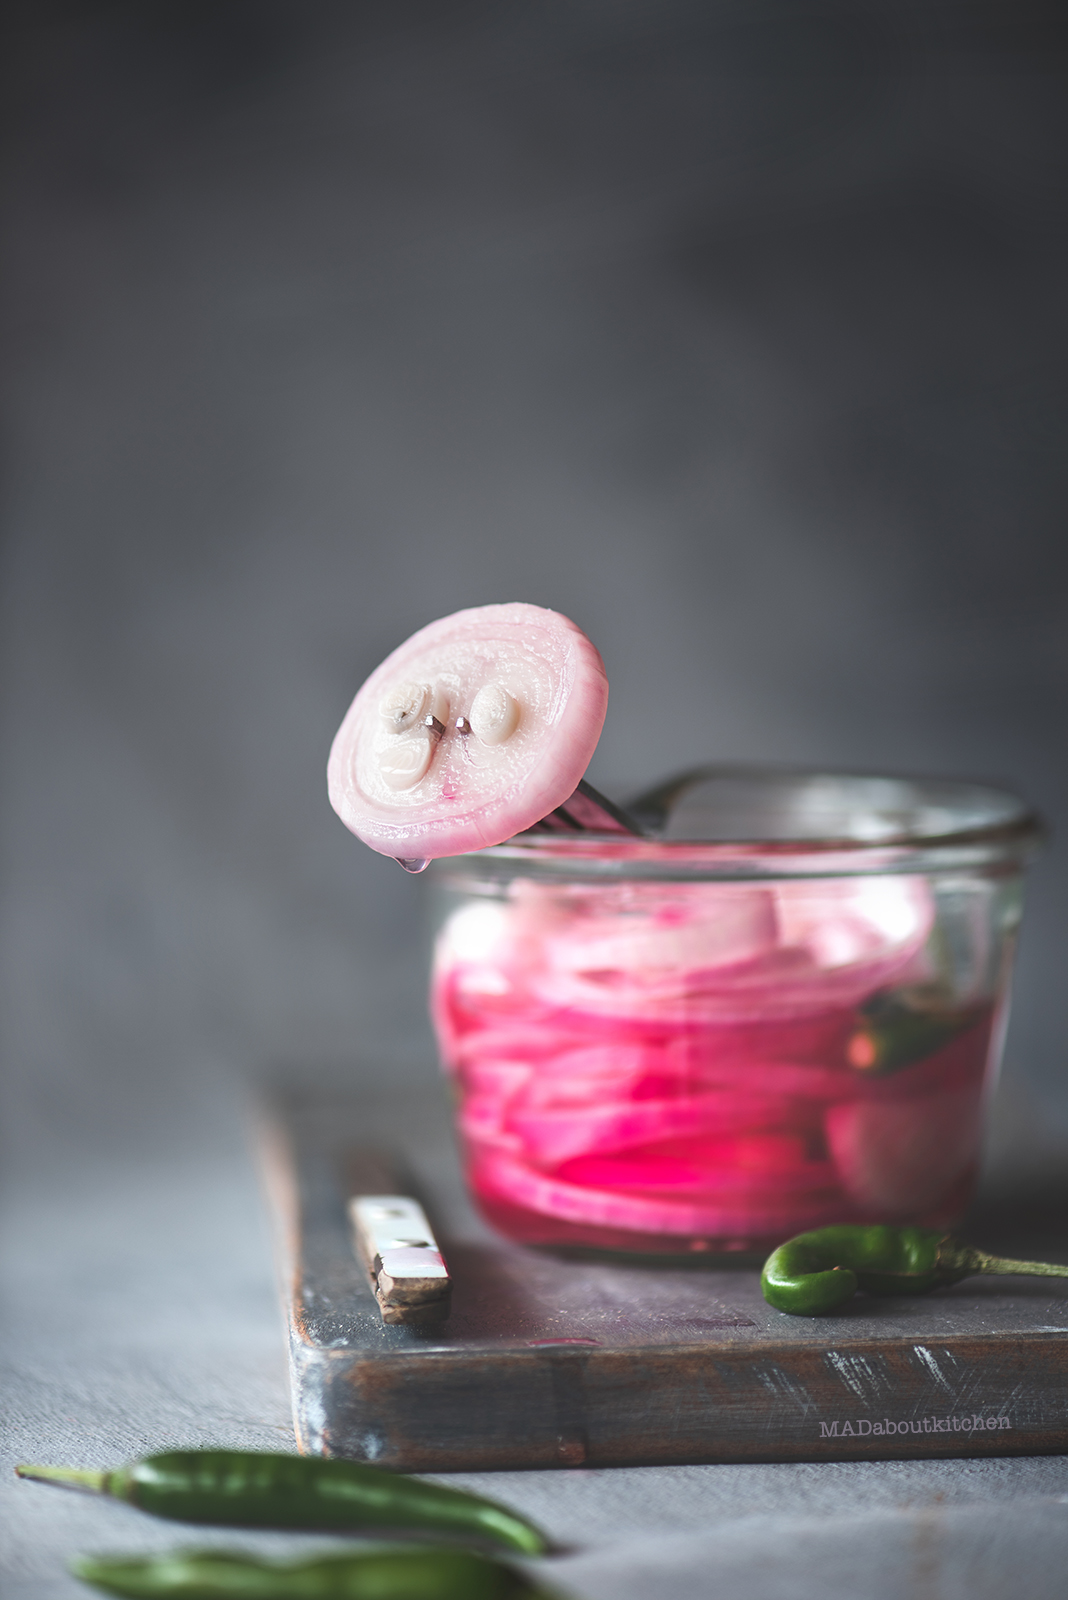 Khatta pyaaz is pickled onions.Onion pickled in vinegar or lemon juice ending in beautiful, tangy, sweet onions. A perfect accompaniment with Indian dishes.